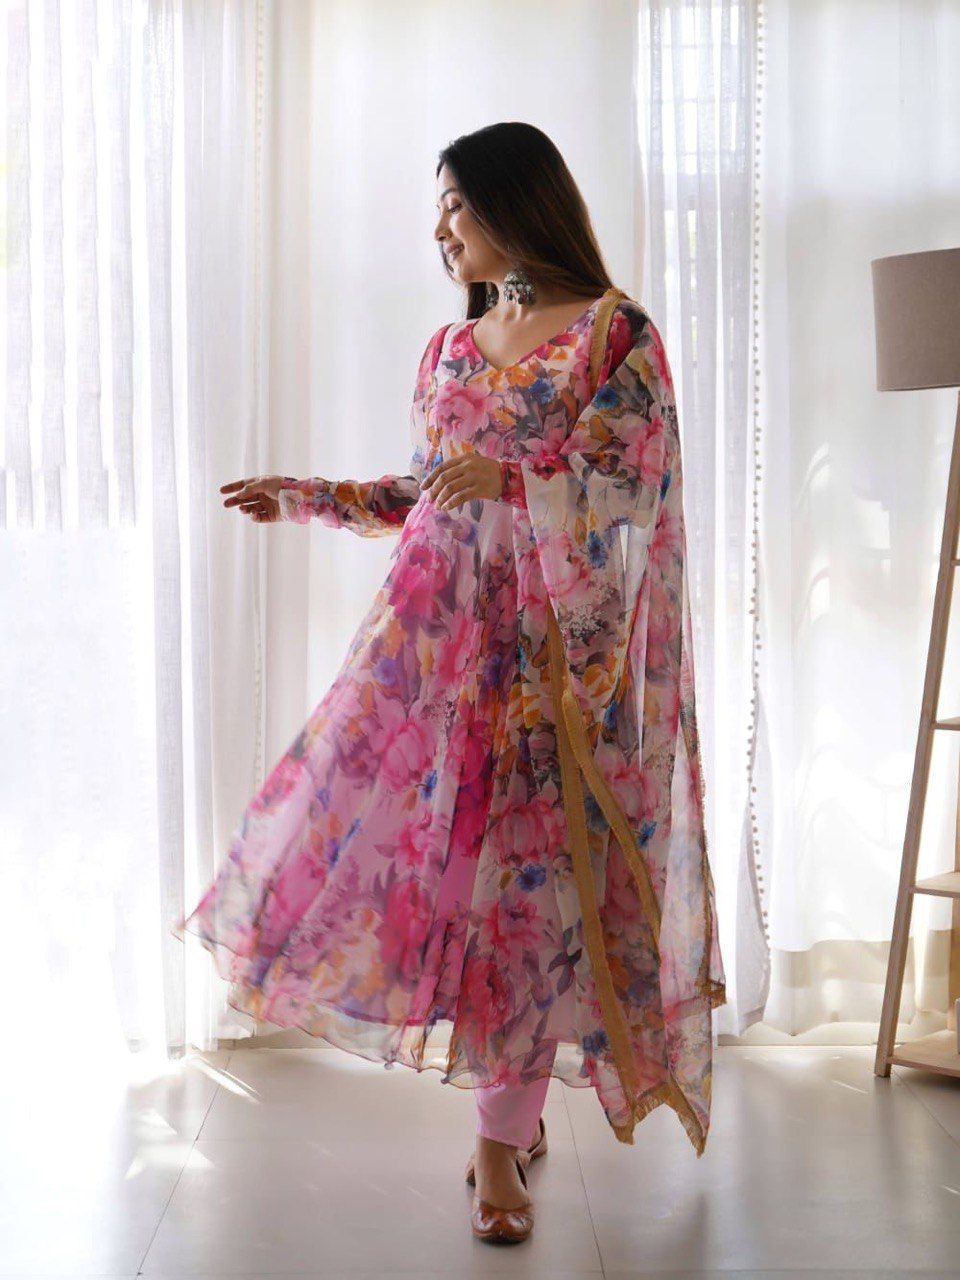 THIS BEAUTIFUL ORGANZA DRESS SUIT WITH A BEAUTIFUL PRINT